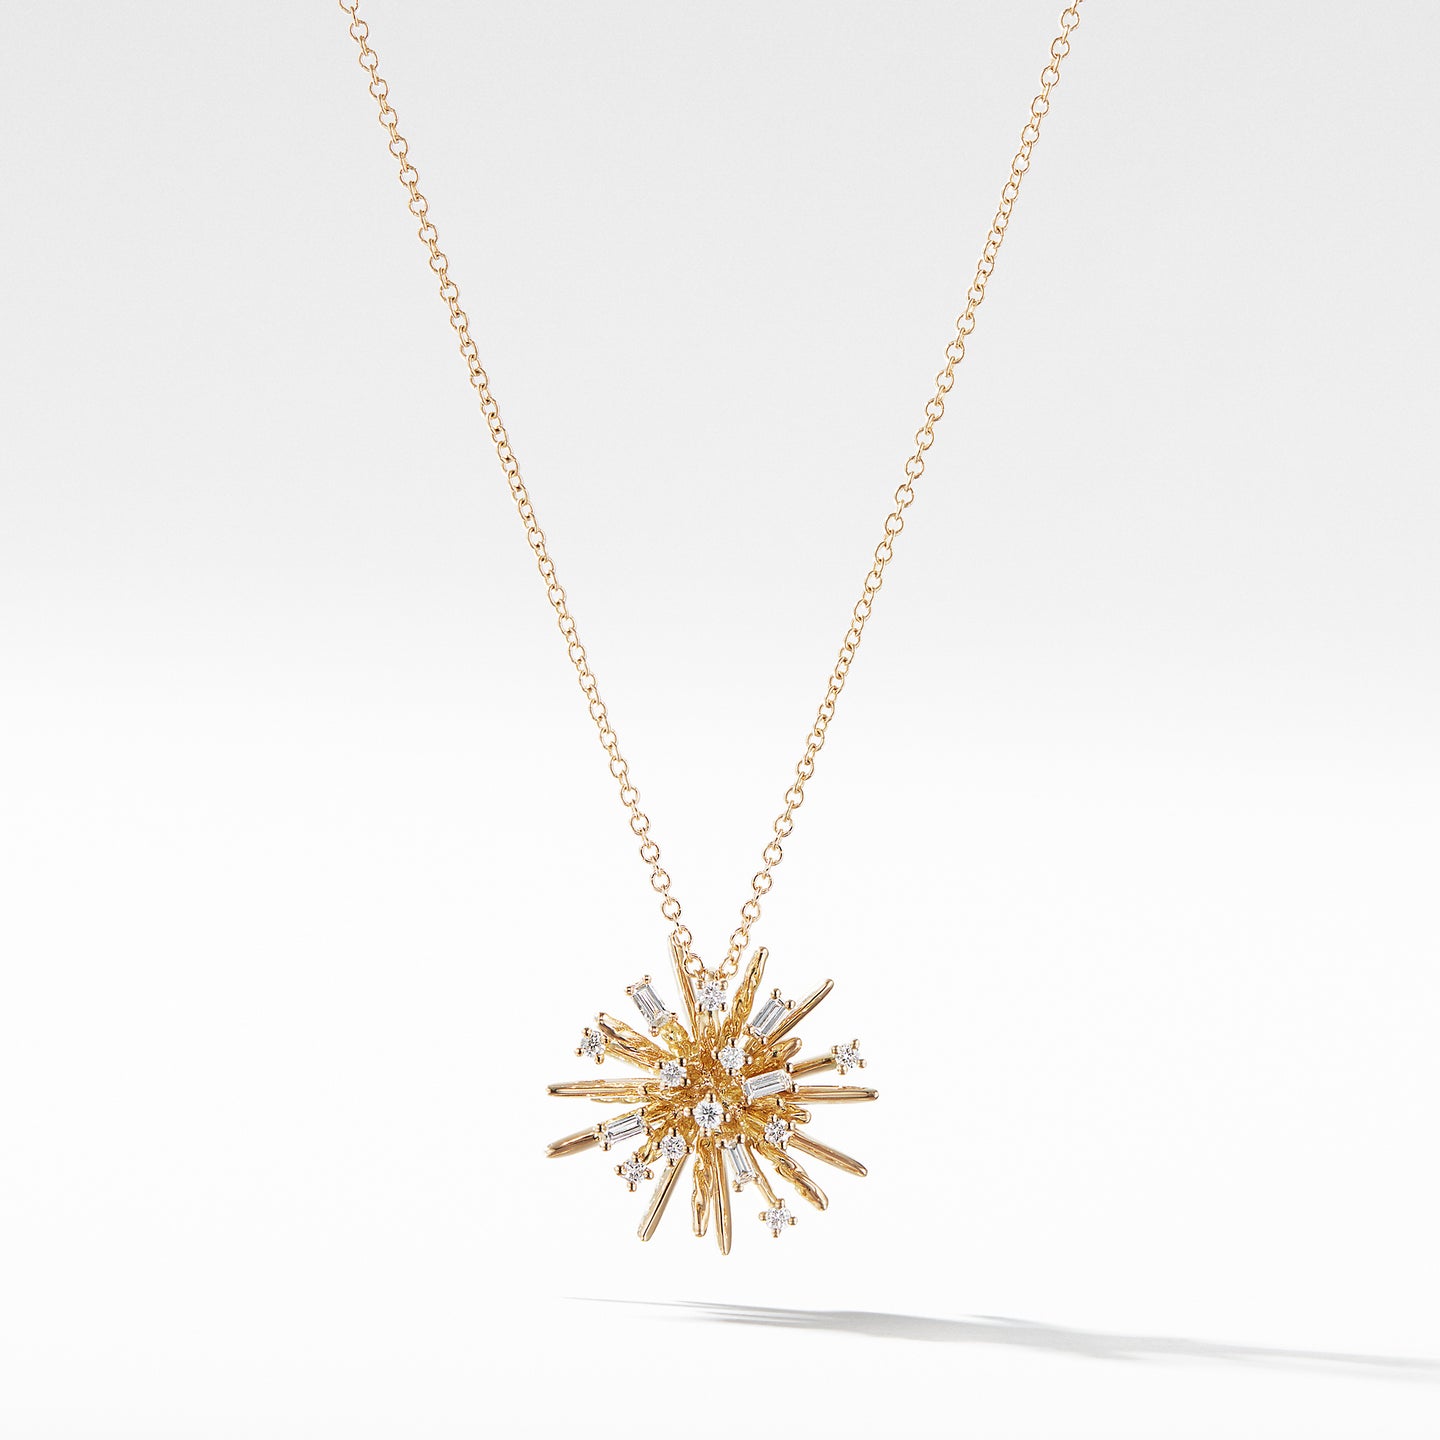 Supernova Small Pendant Necklace with Diamonds in 18K Gold, 18